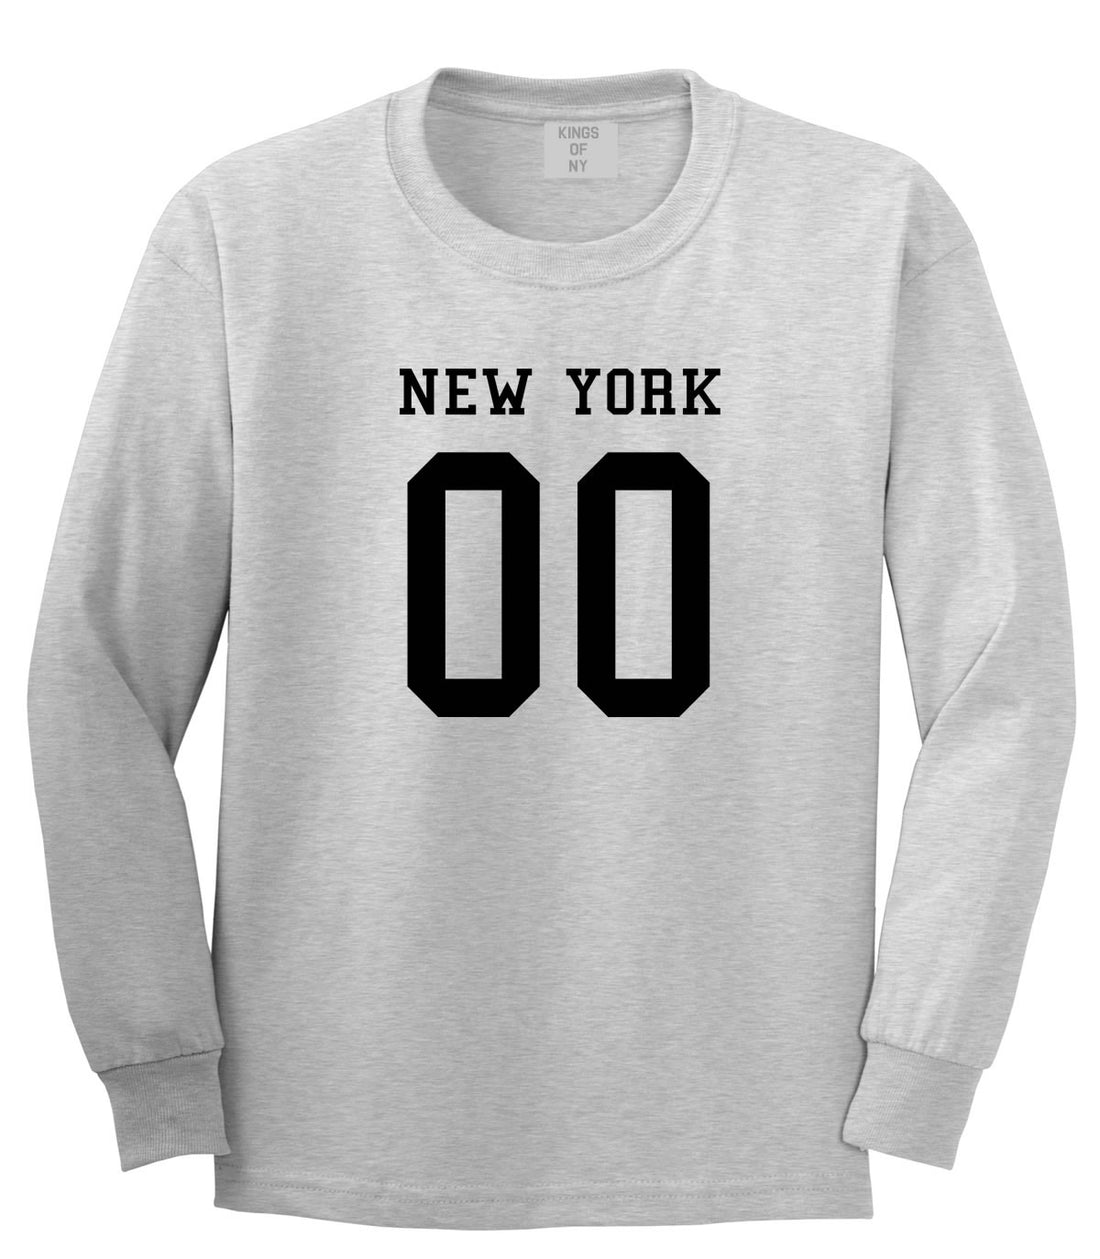 New York Team 00 Jersey Long Sleeve T-Shirt in Grey By Kings Of NY